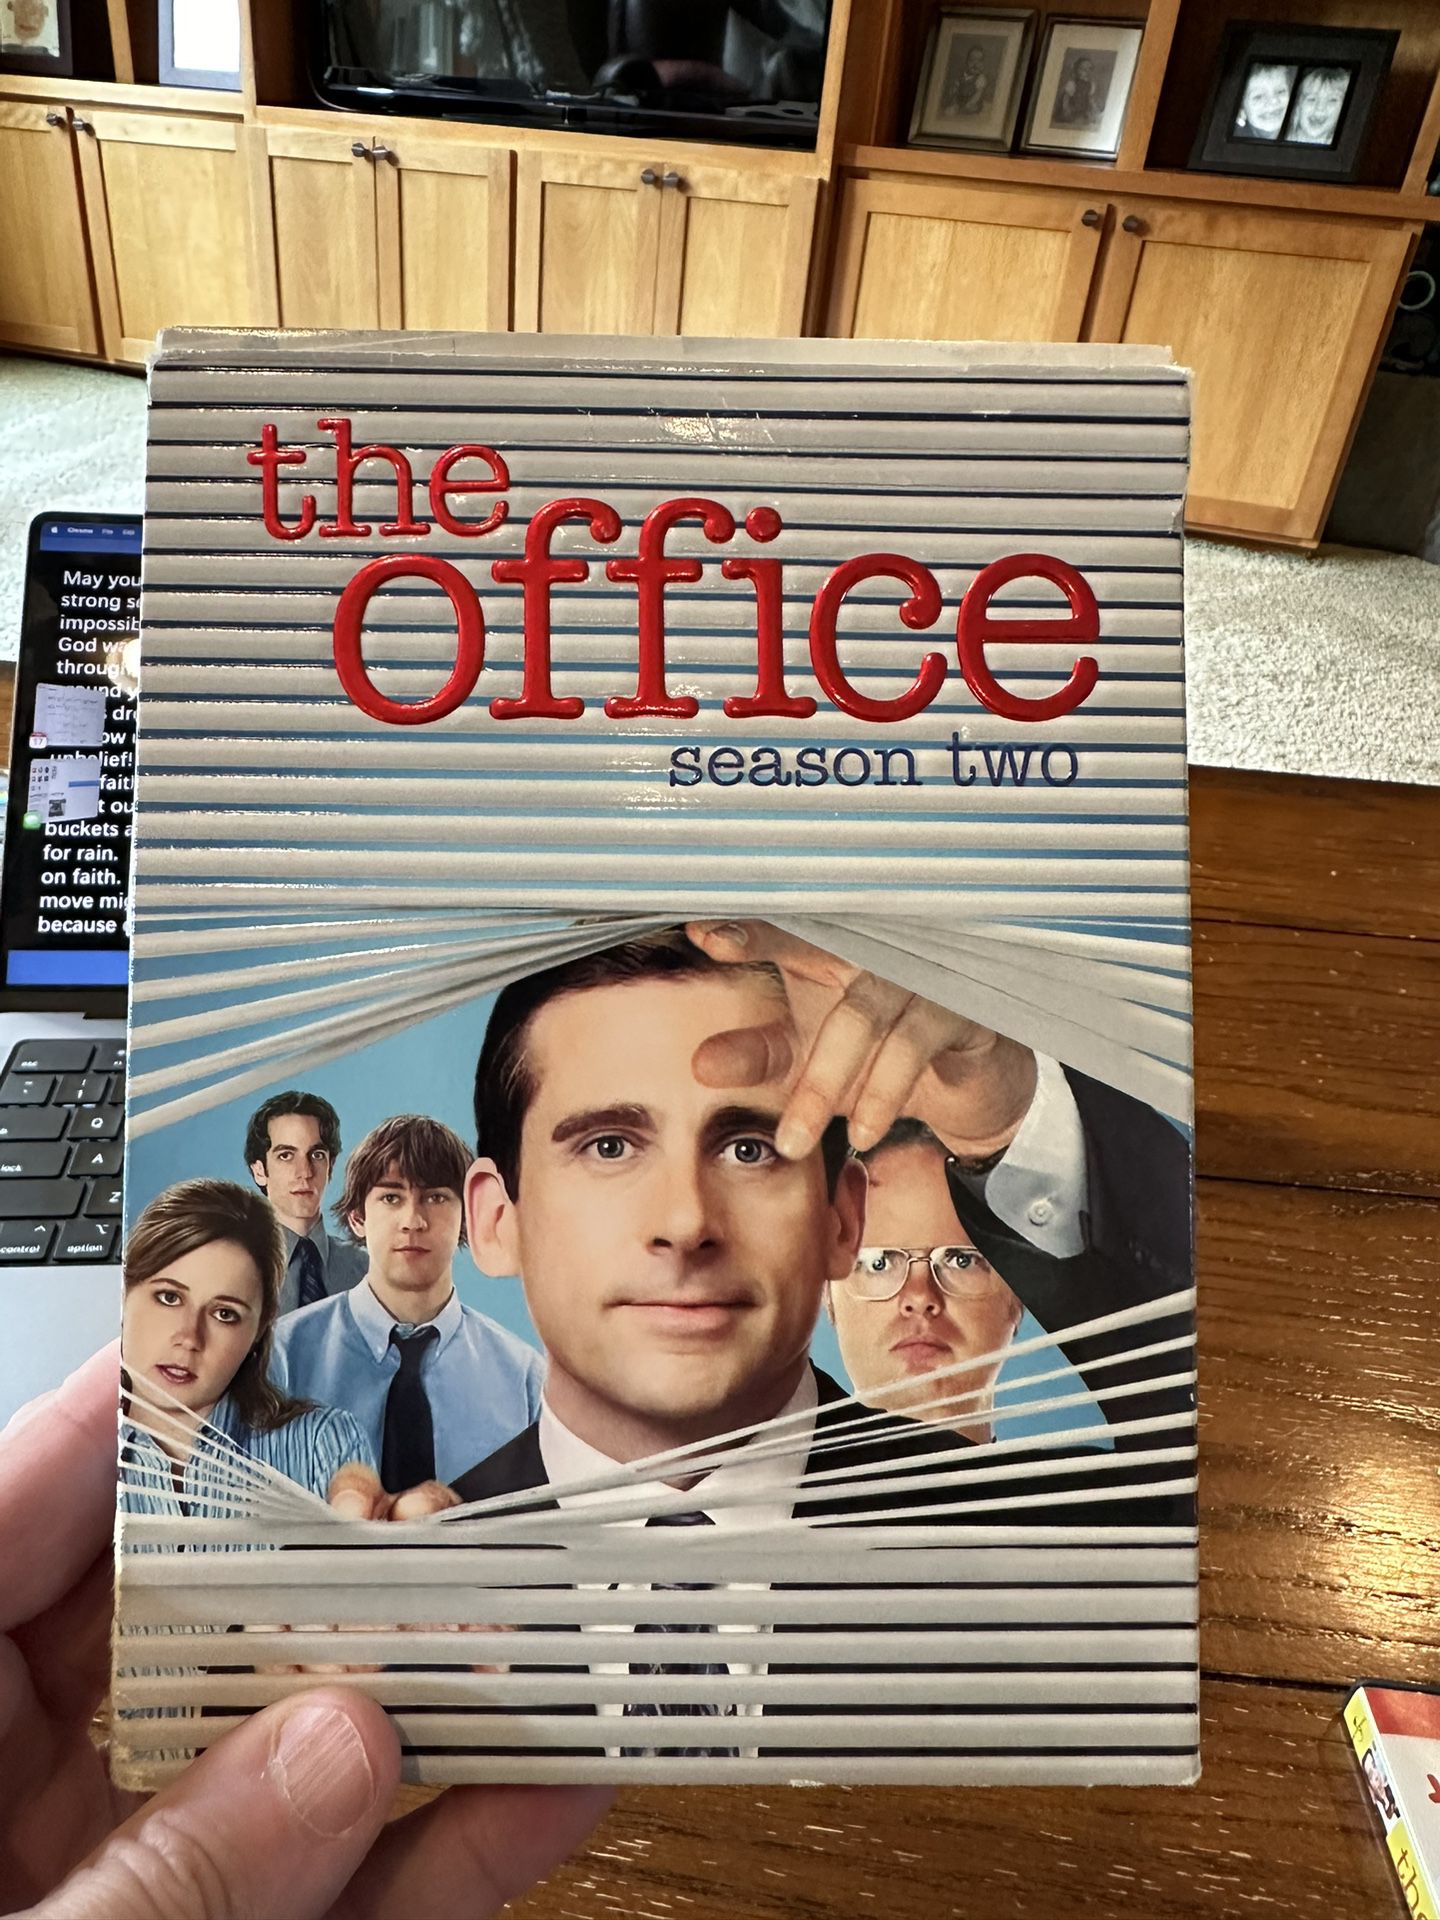 The Office season 2 + The Digital Short Collection 